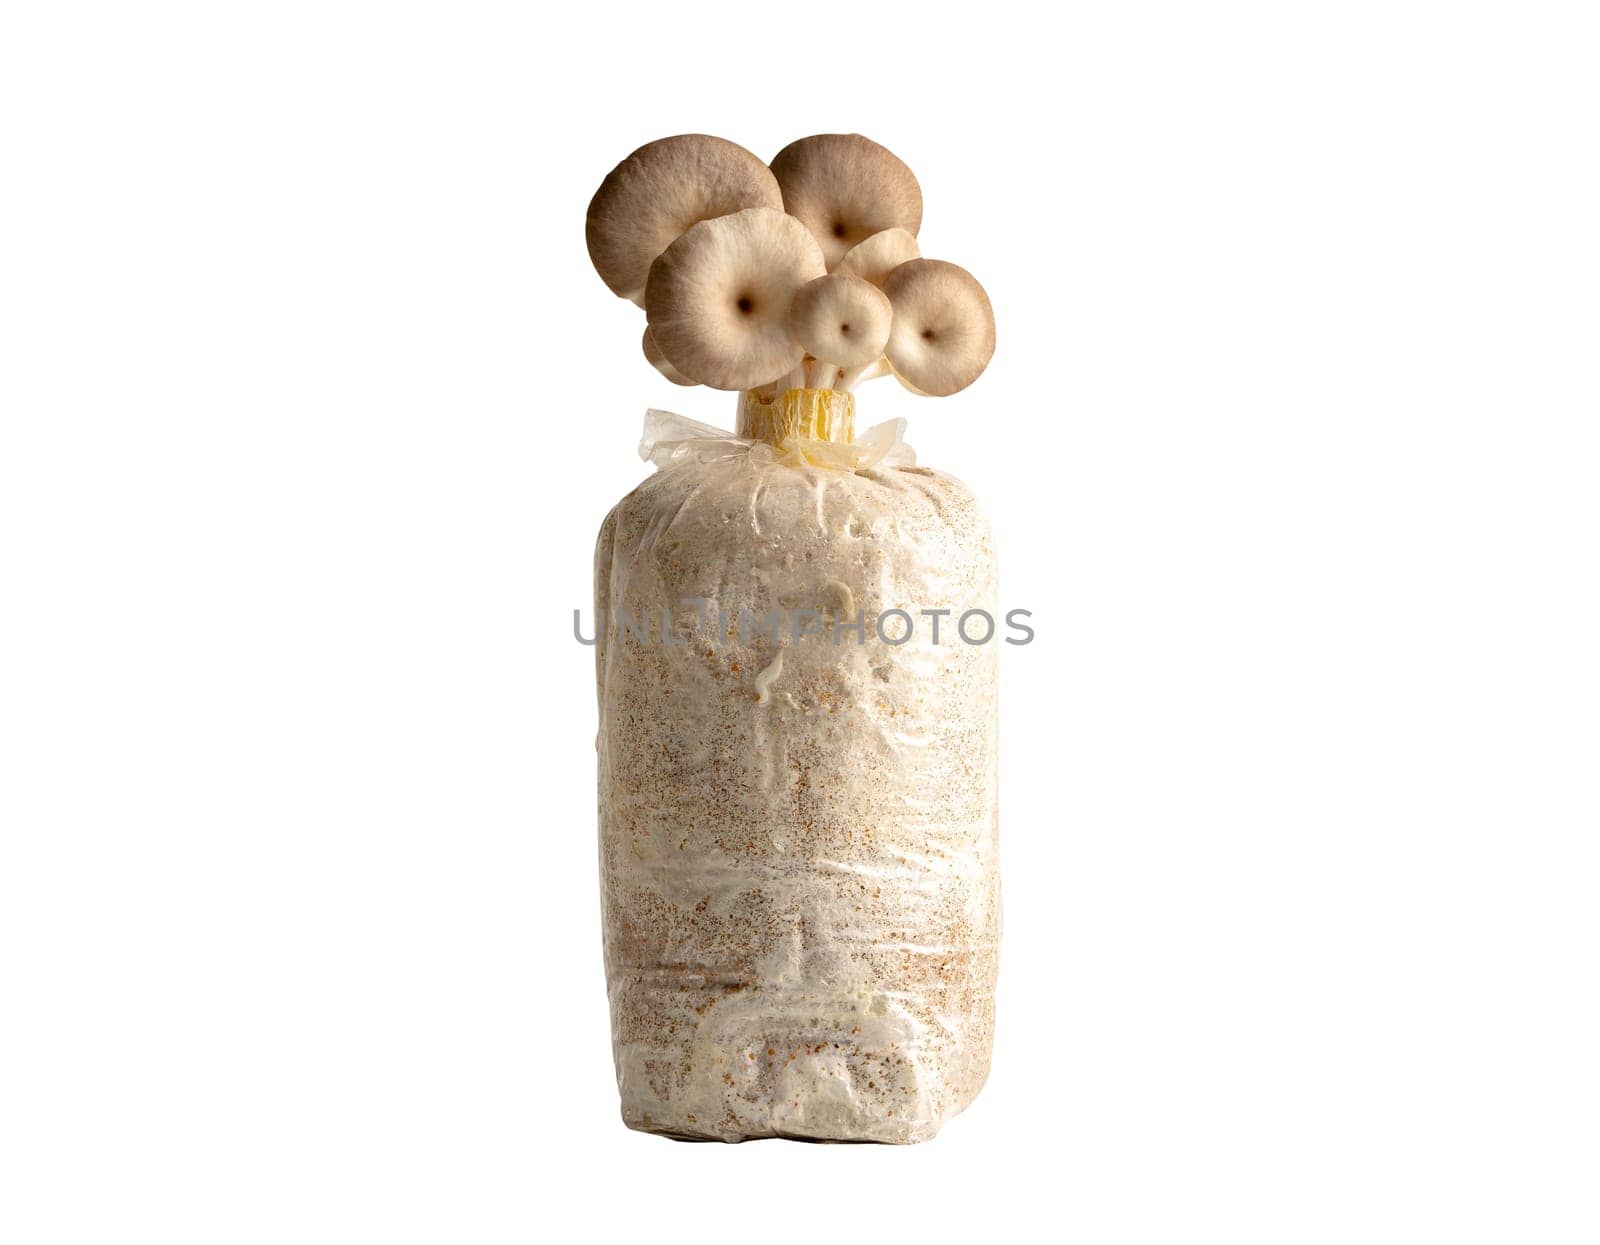 Mushroom cultivation, Indian Oyster, Phoenix Mushroom, Lung Oyster on soil in plastic bag isolated on white background with clipping path. by pamai